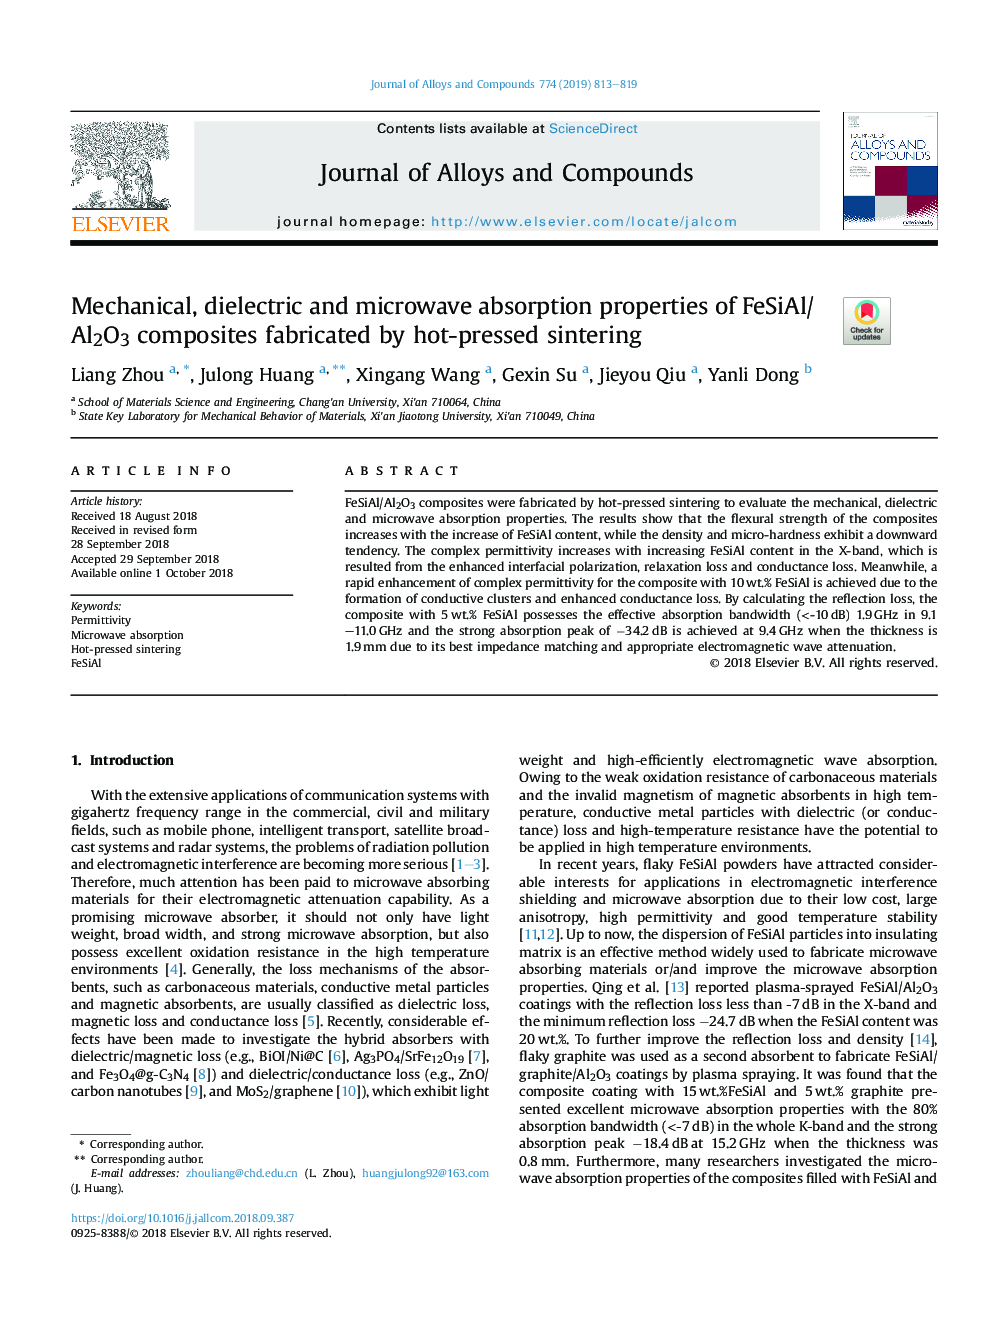 Mechanical, dielectric and microwave absorption properties of FeSiAl/Al2O3 composites fabricated by hot-pressed sintering